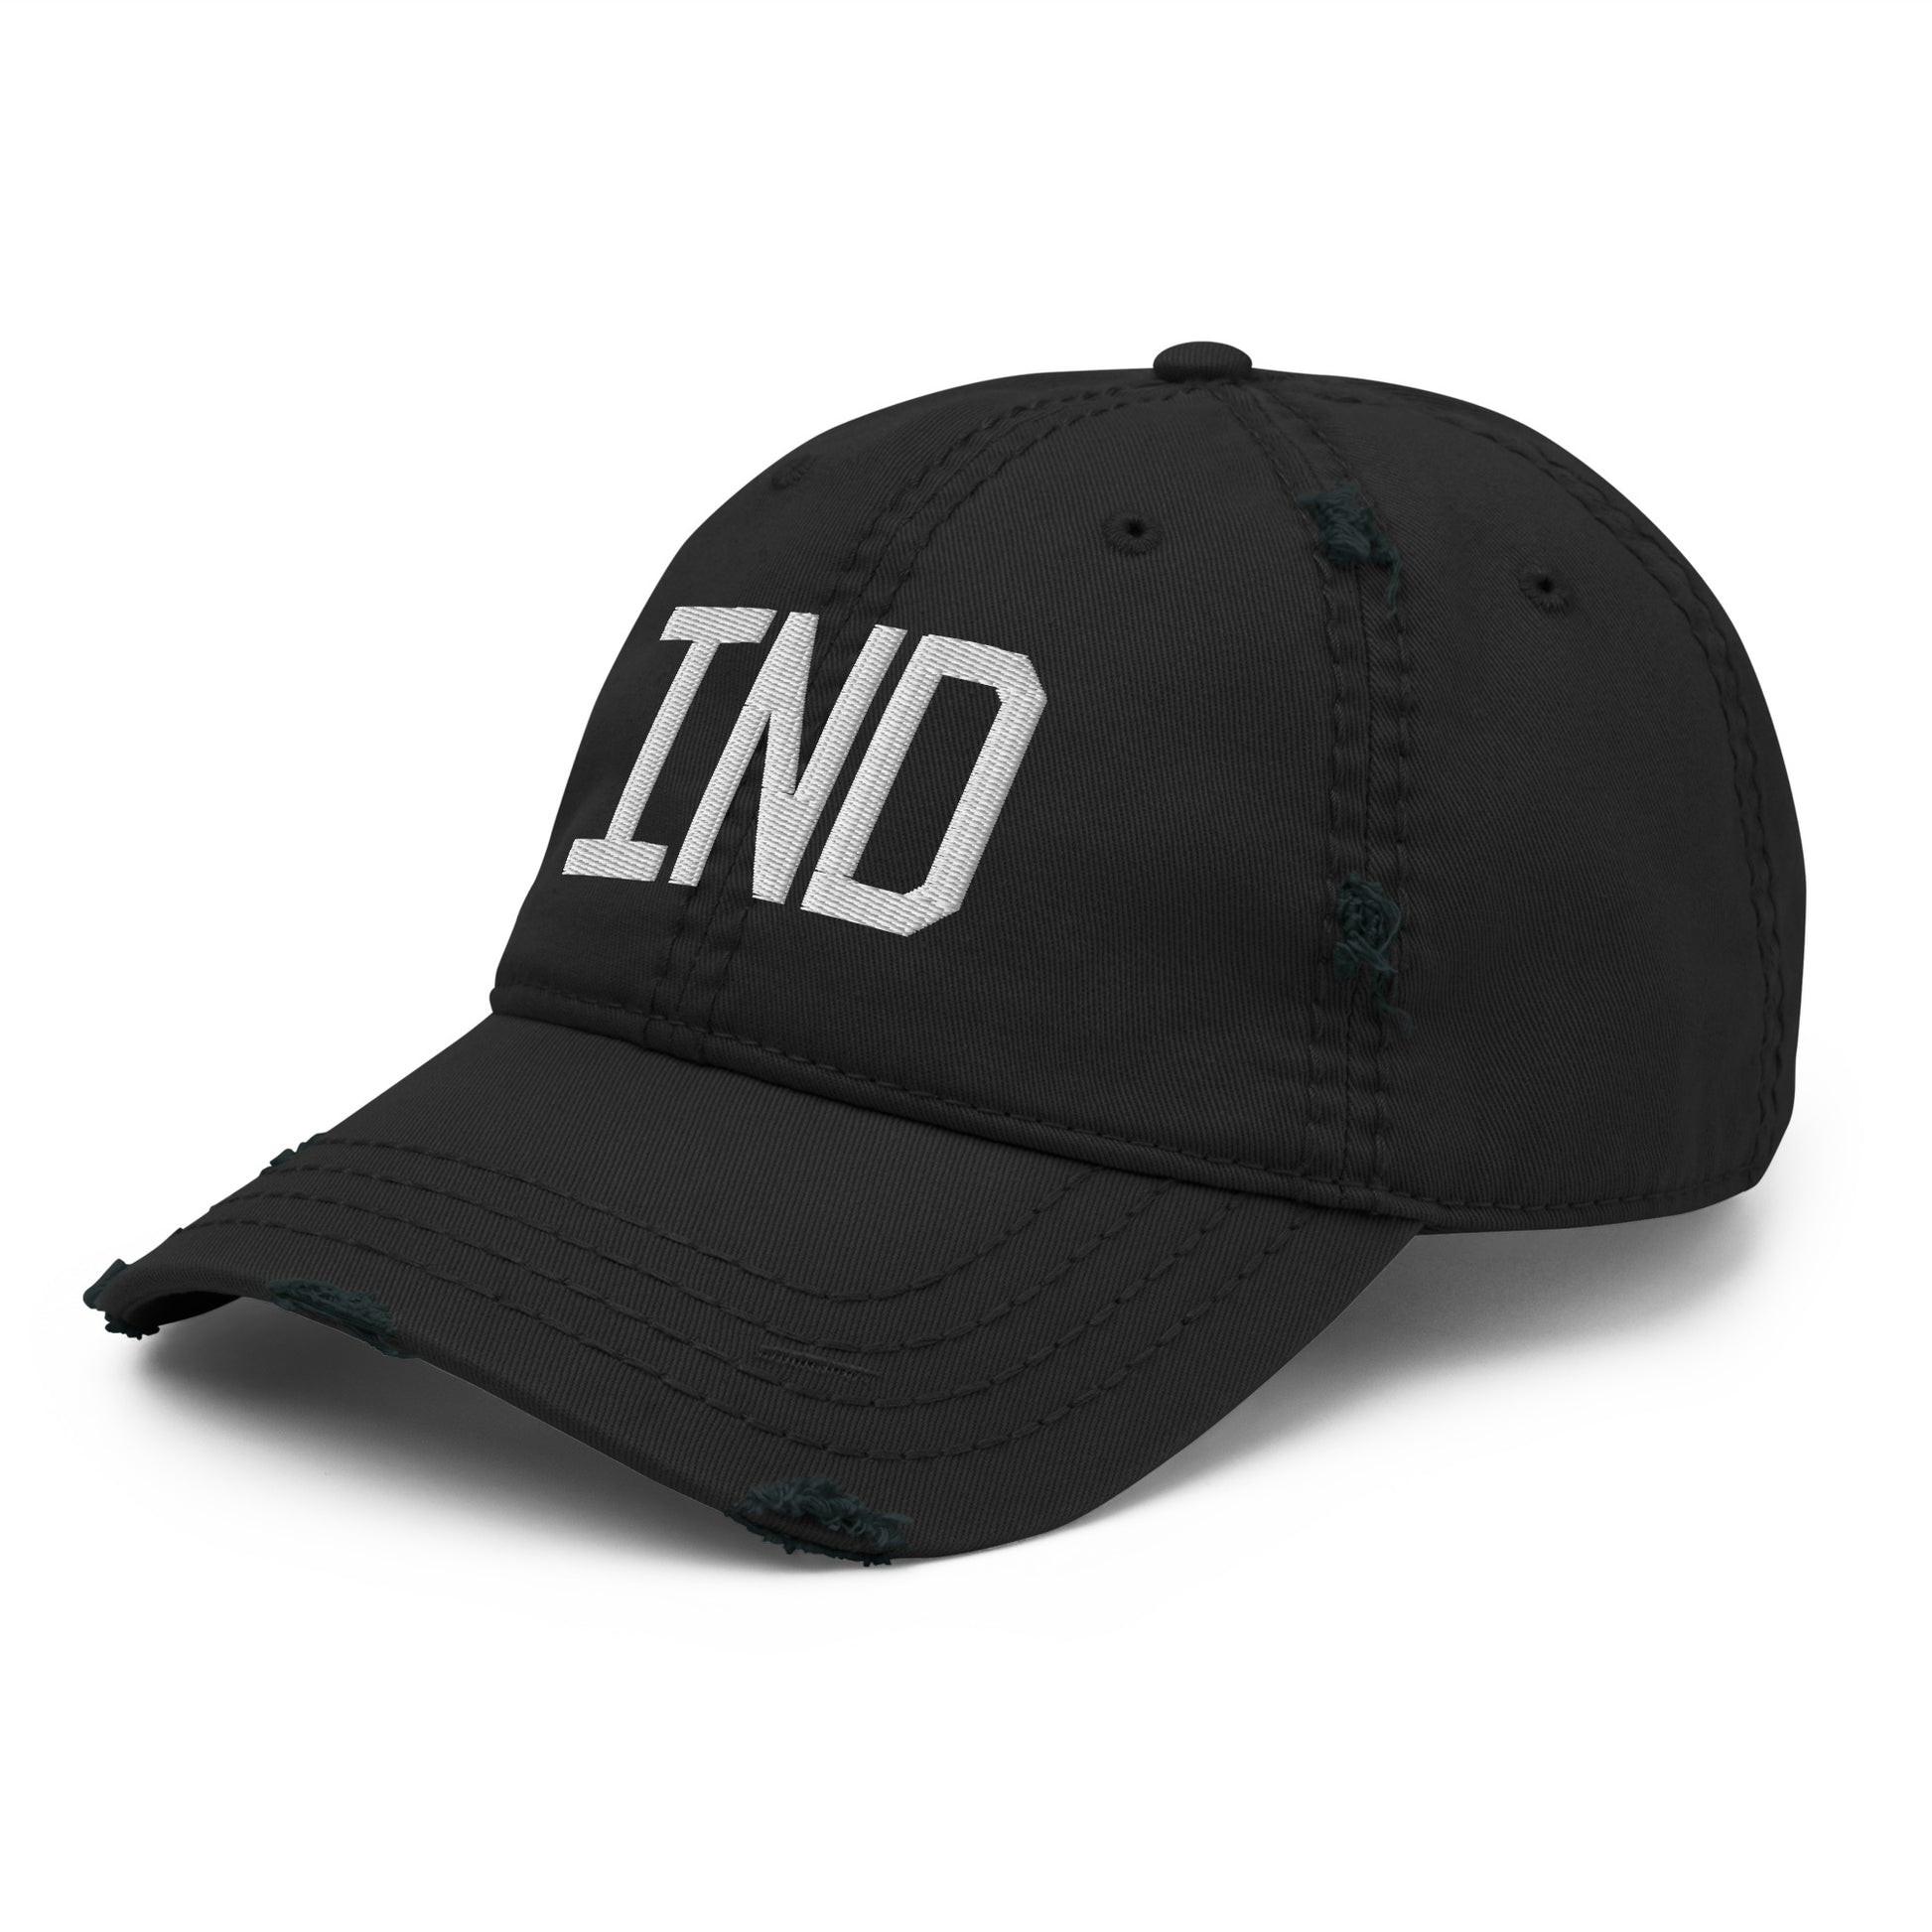 Airport Code Distressed Hat - White • IND Indianapolis • YHM Designs - Image 11